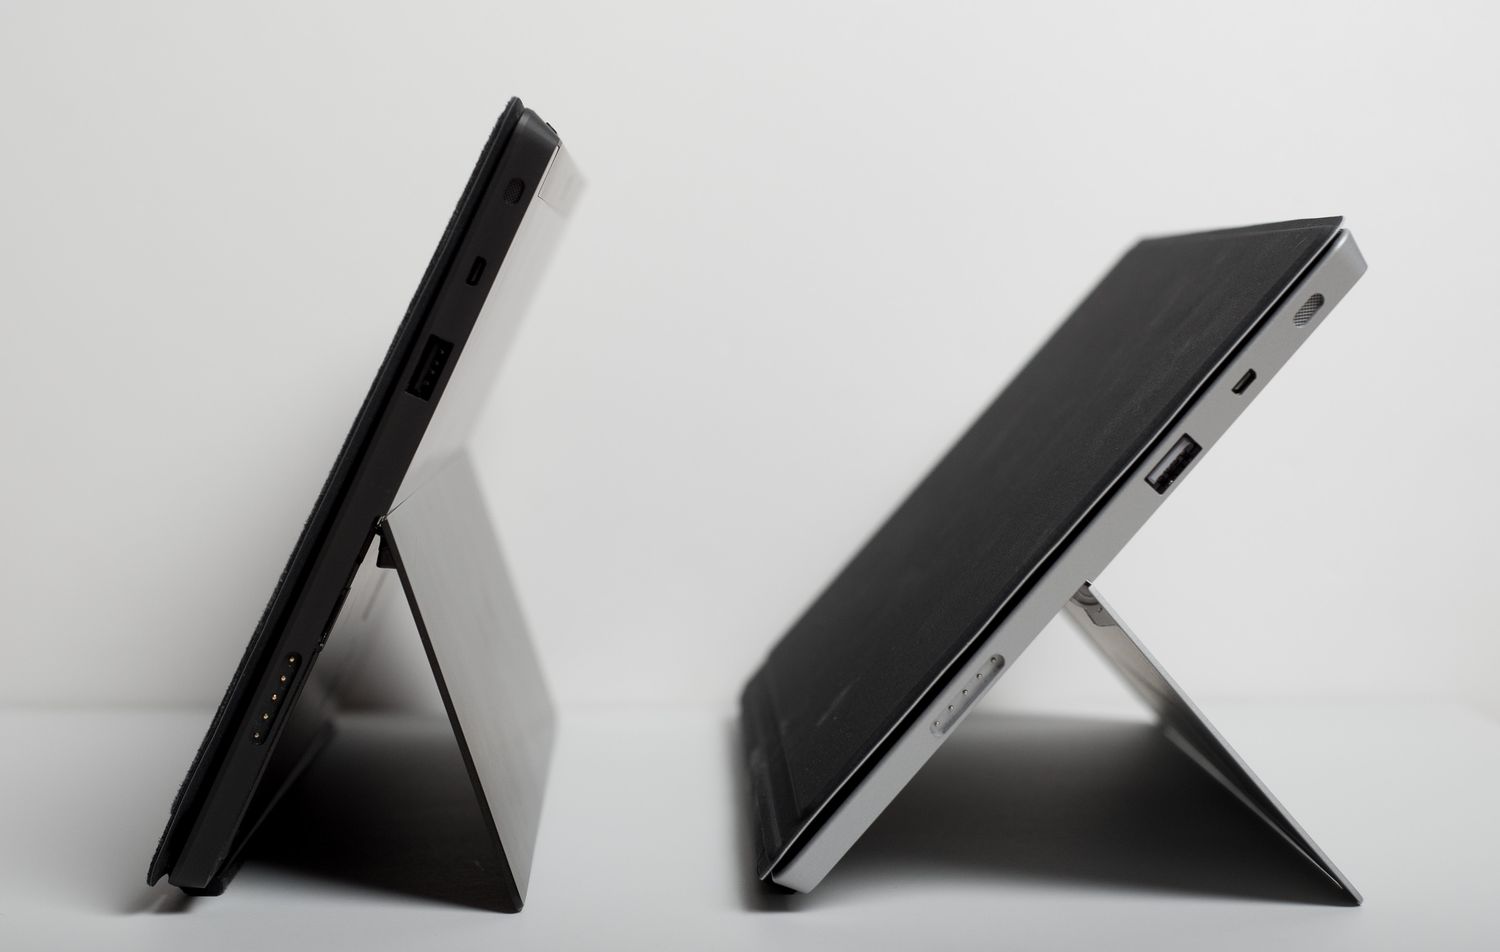 surface-pro-2-and-surface-2-everything-you-need-to-know